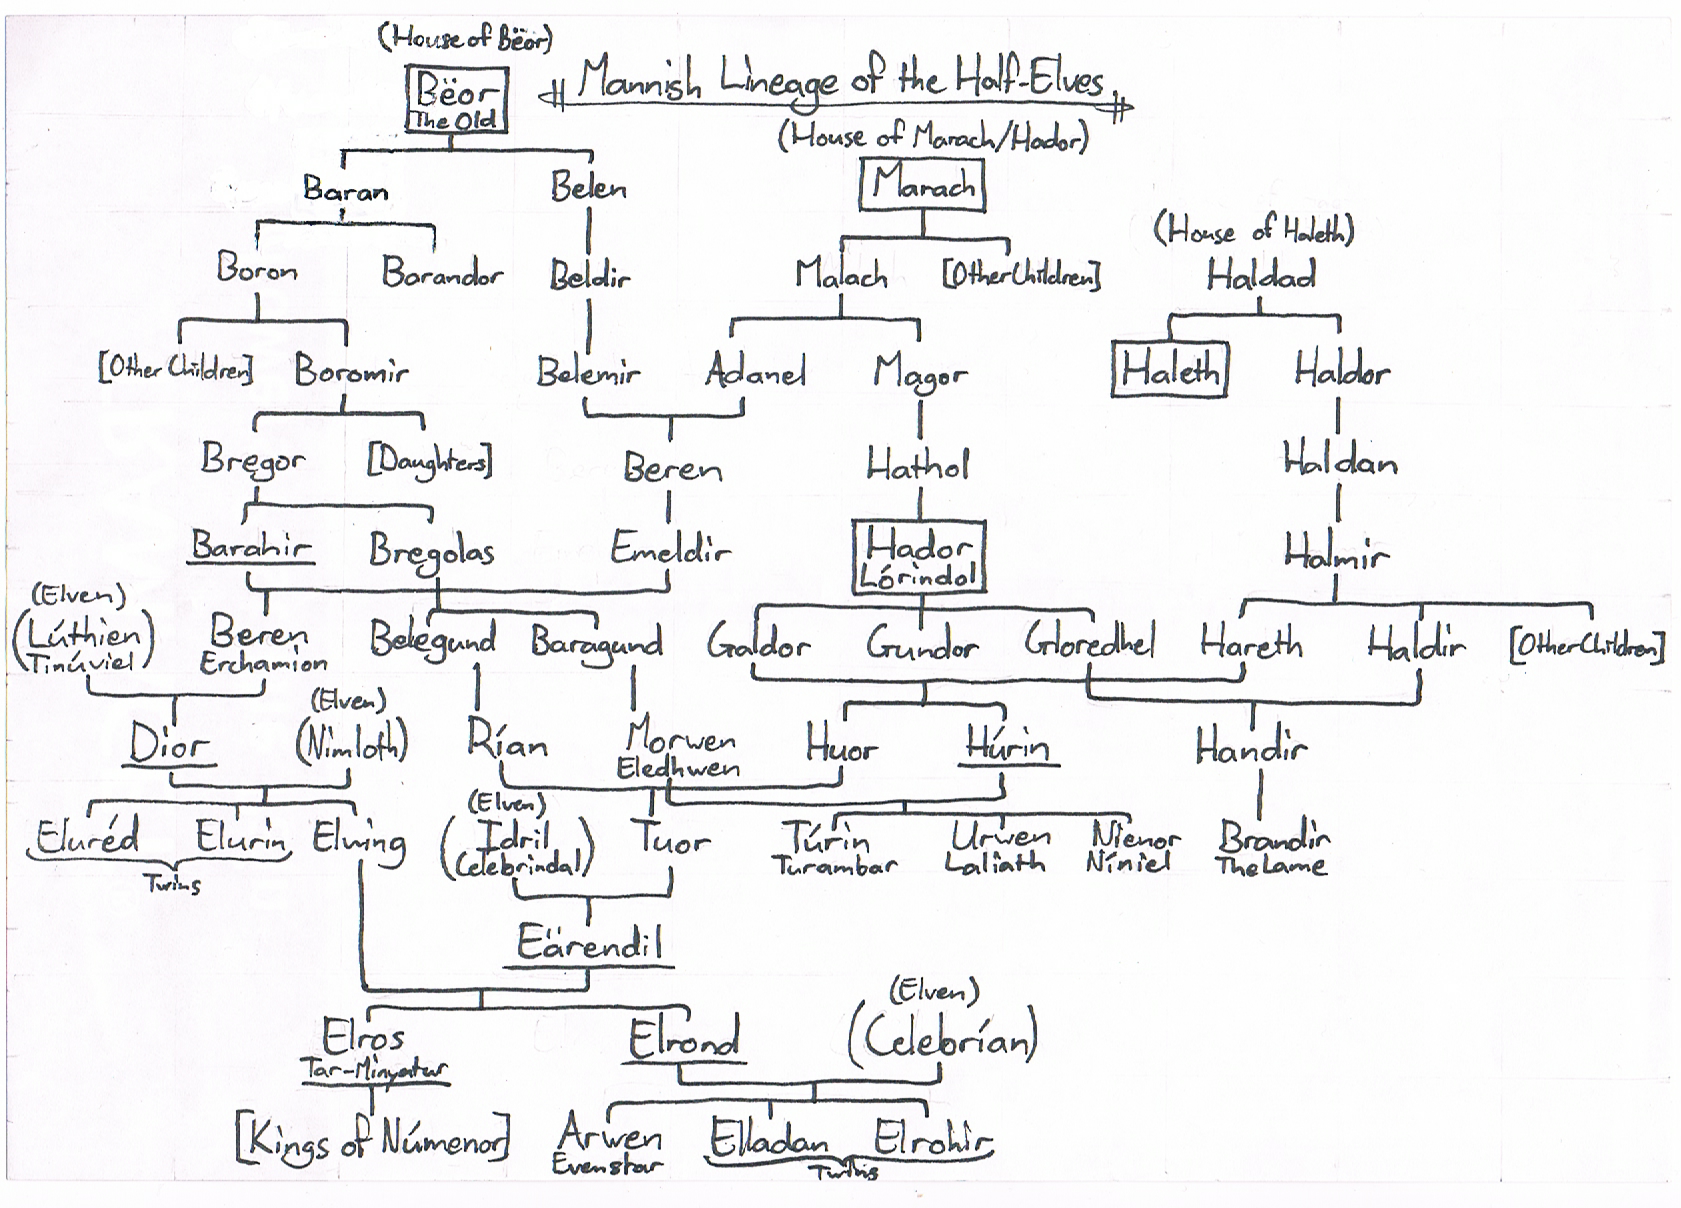 Geneology of the Half-Elves - Mannish Lineage.png